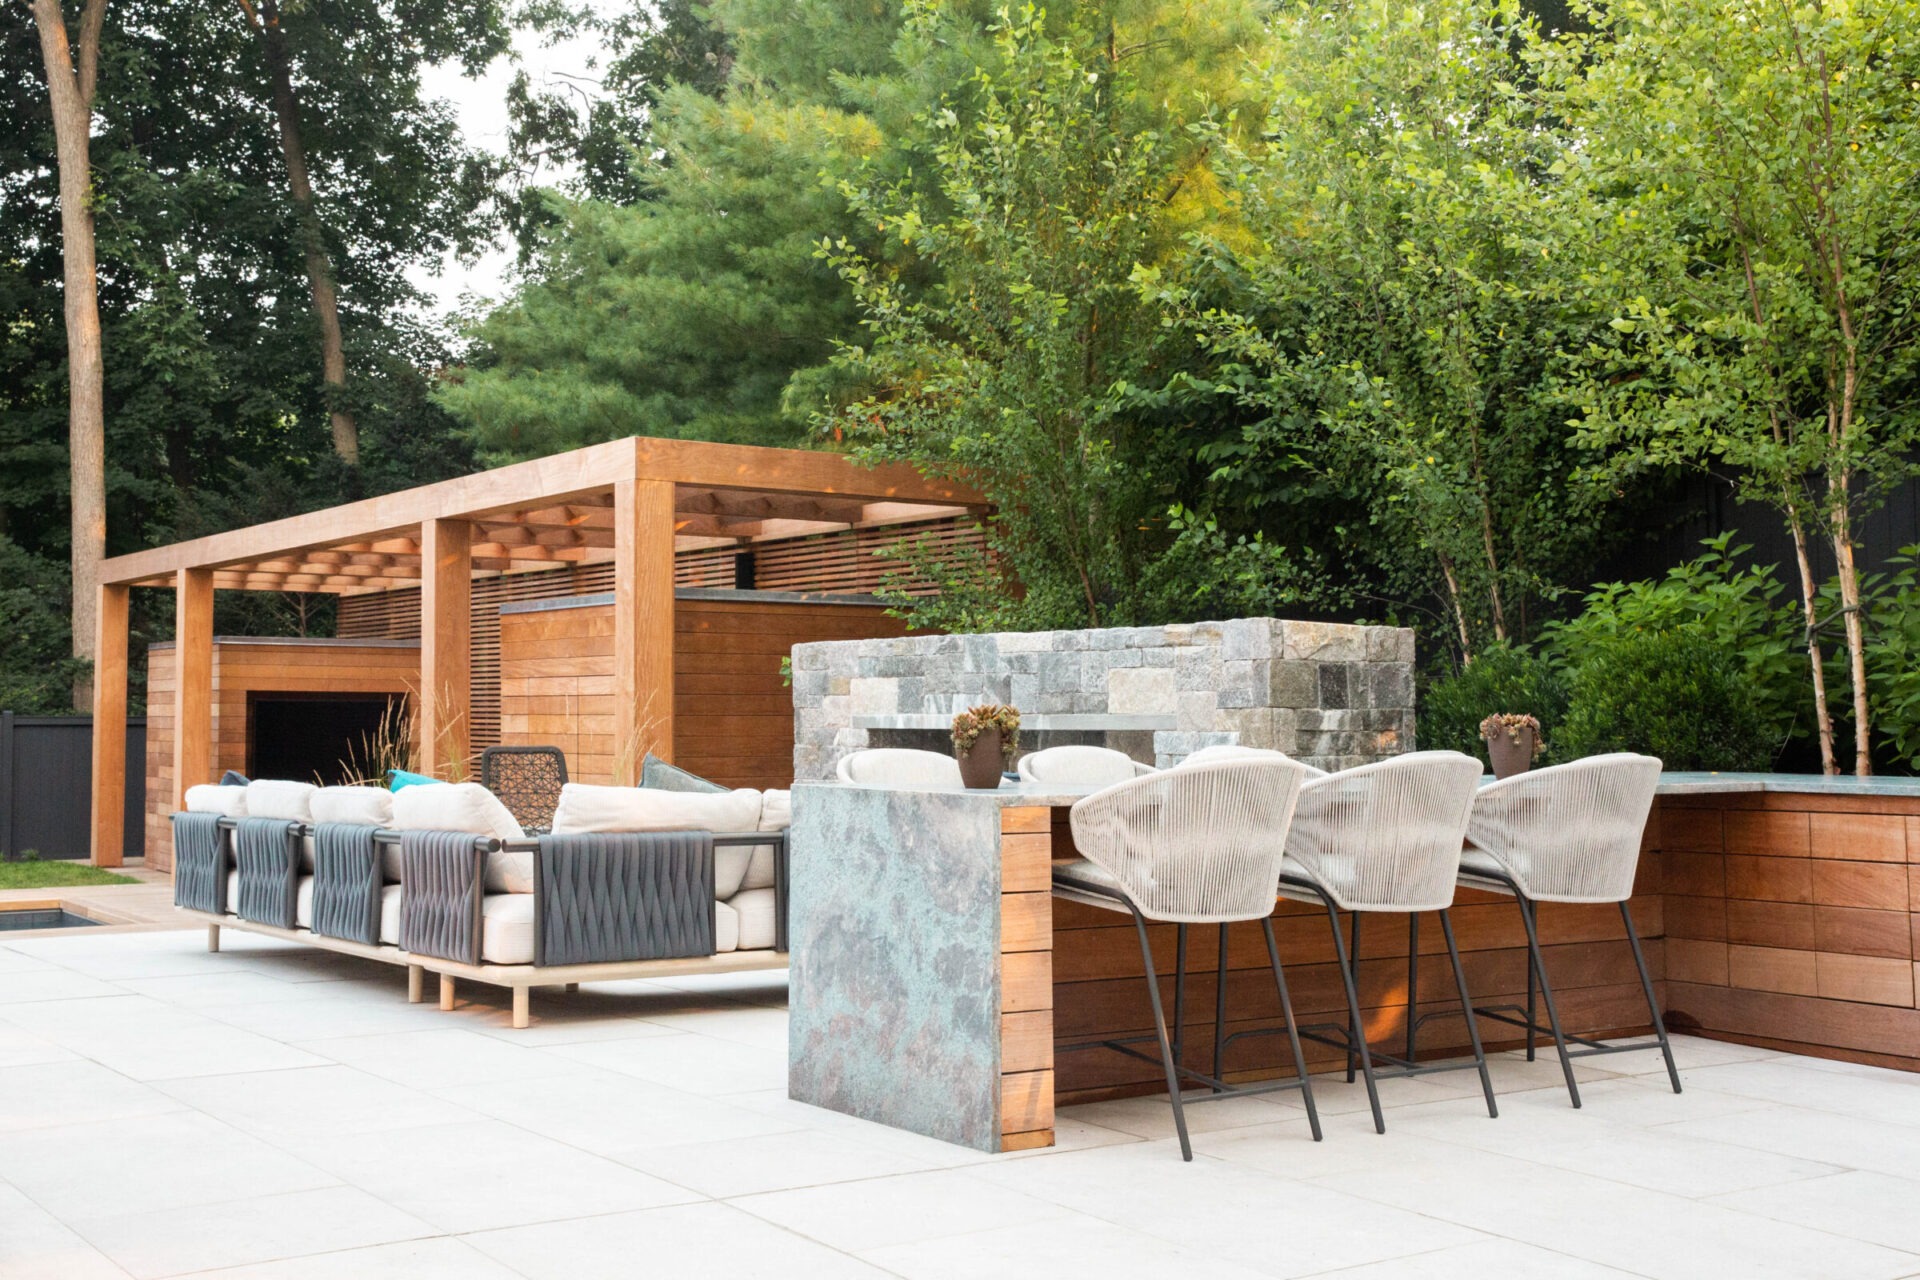 Outdoor patio with modern furniture, wooden pergola, stone bar, and surrounding greenery, blending comfort with nature for relaxation and entertainment.